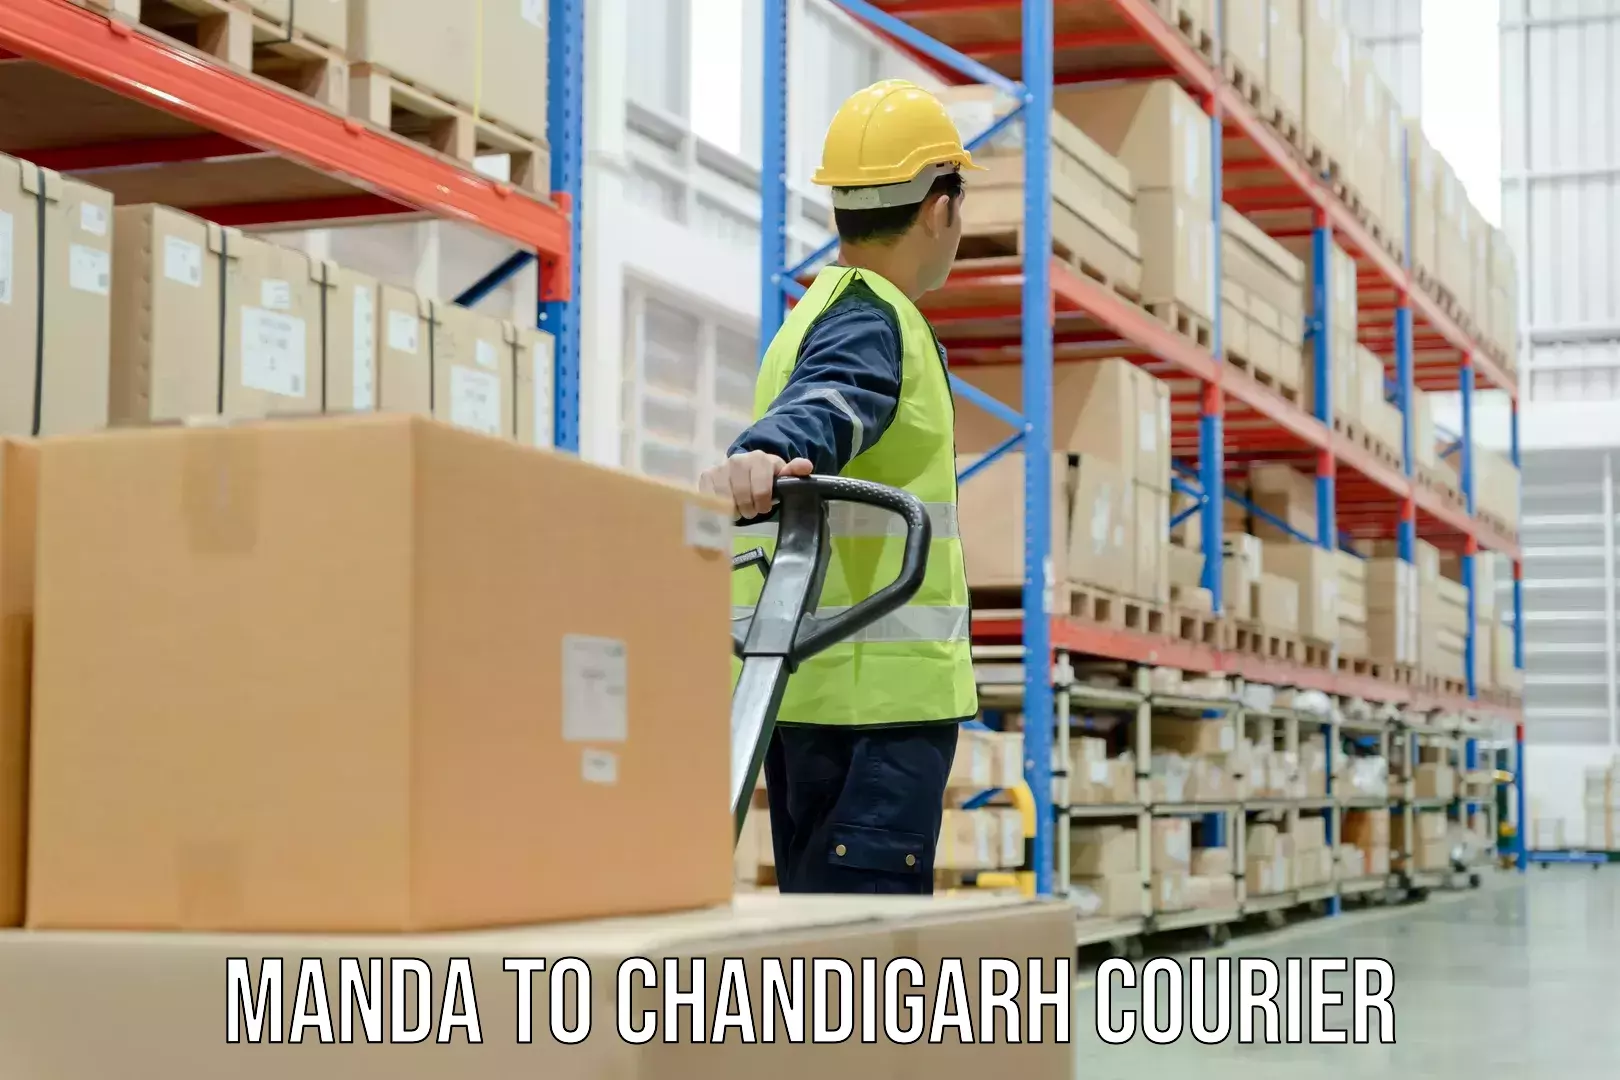 User-friendly delivery service Manda to Chandigarh